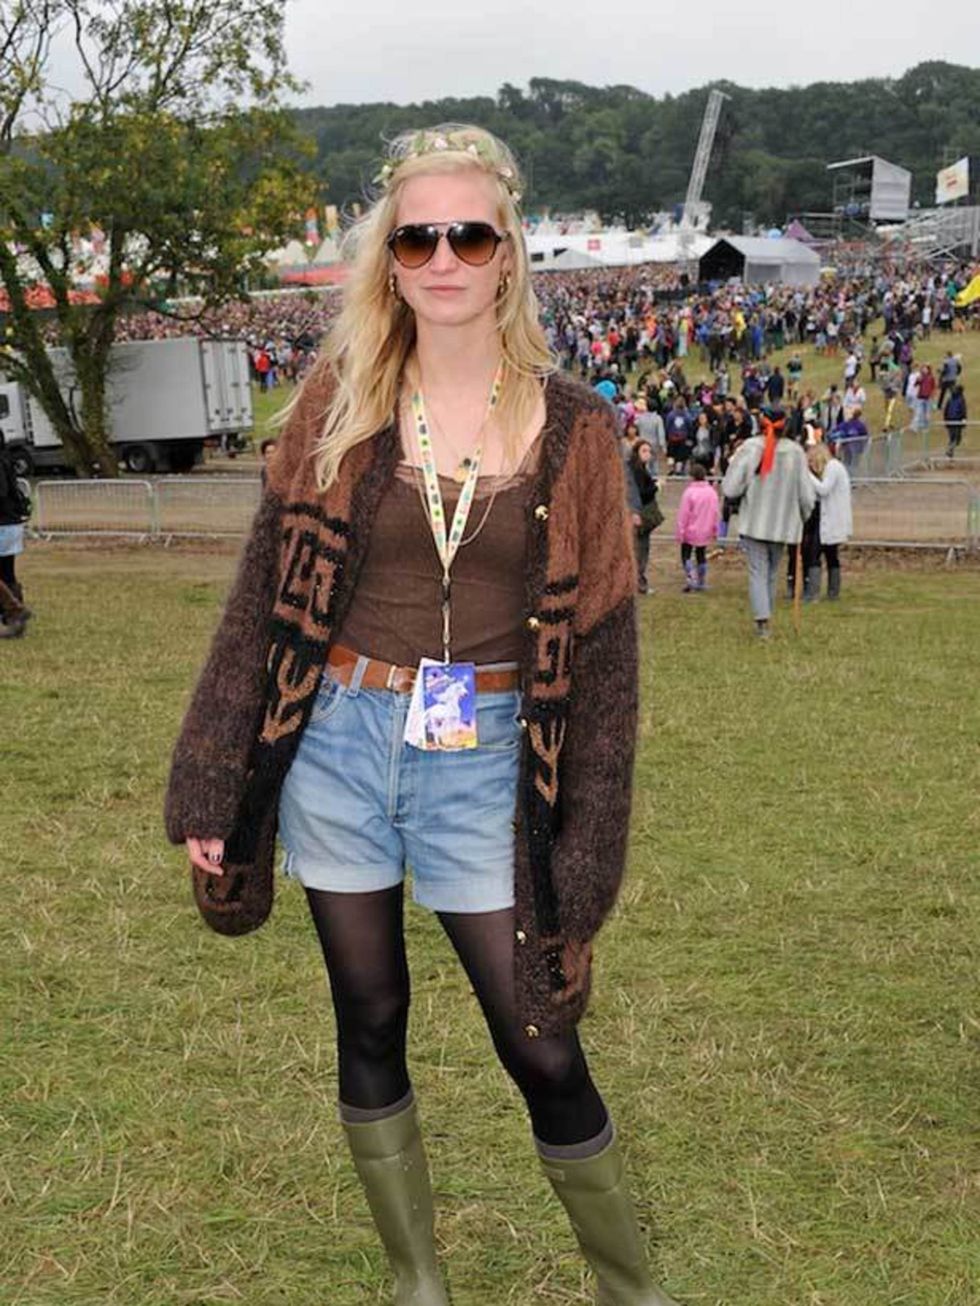 <p>Alice Davey, 21, Student. Rayban sunglasses, Vintage cardie, H&amp;M top, Levi shorts, Dunlop wellies.</p>